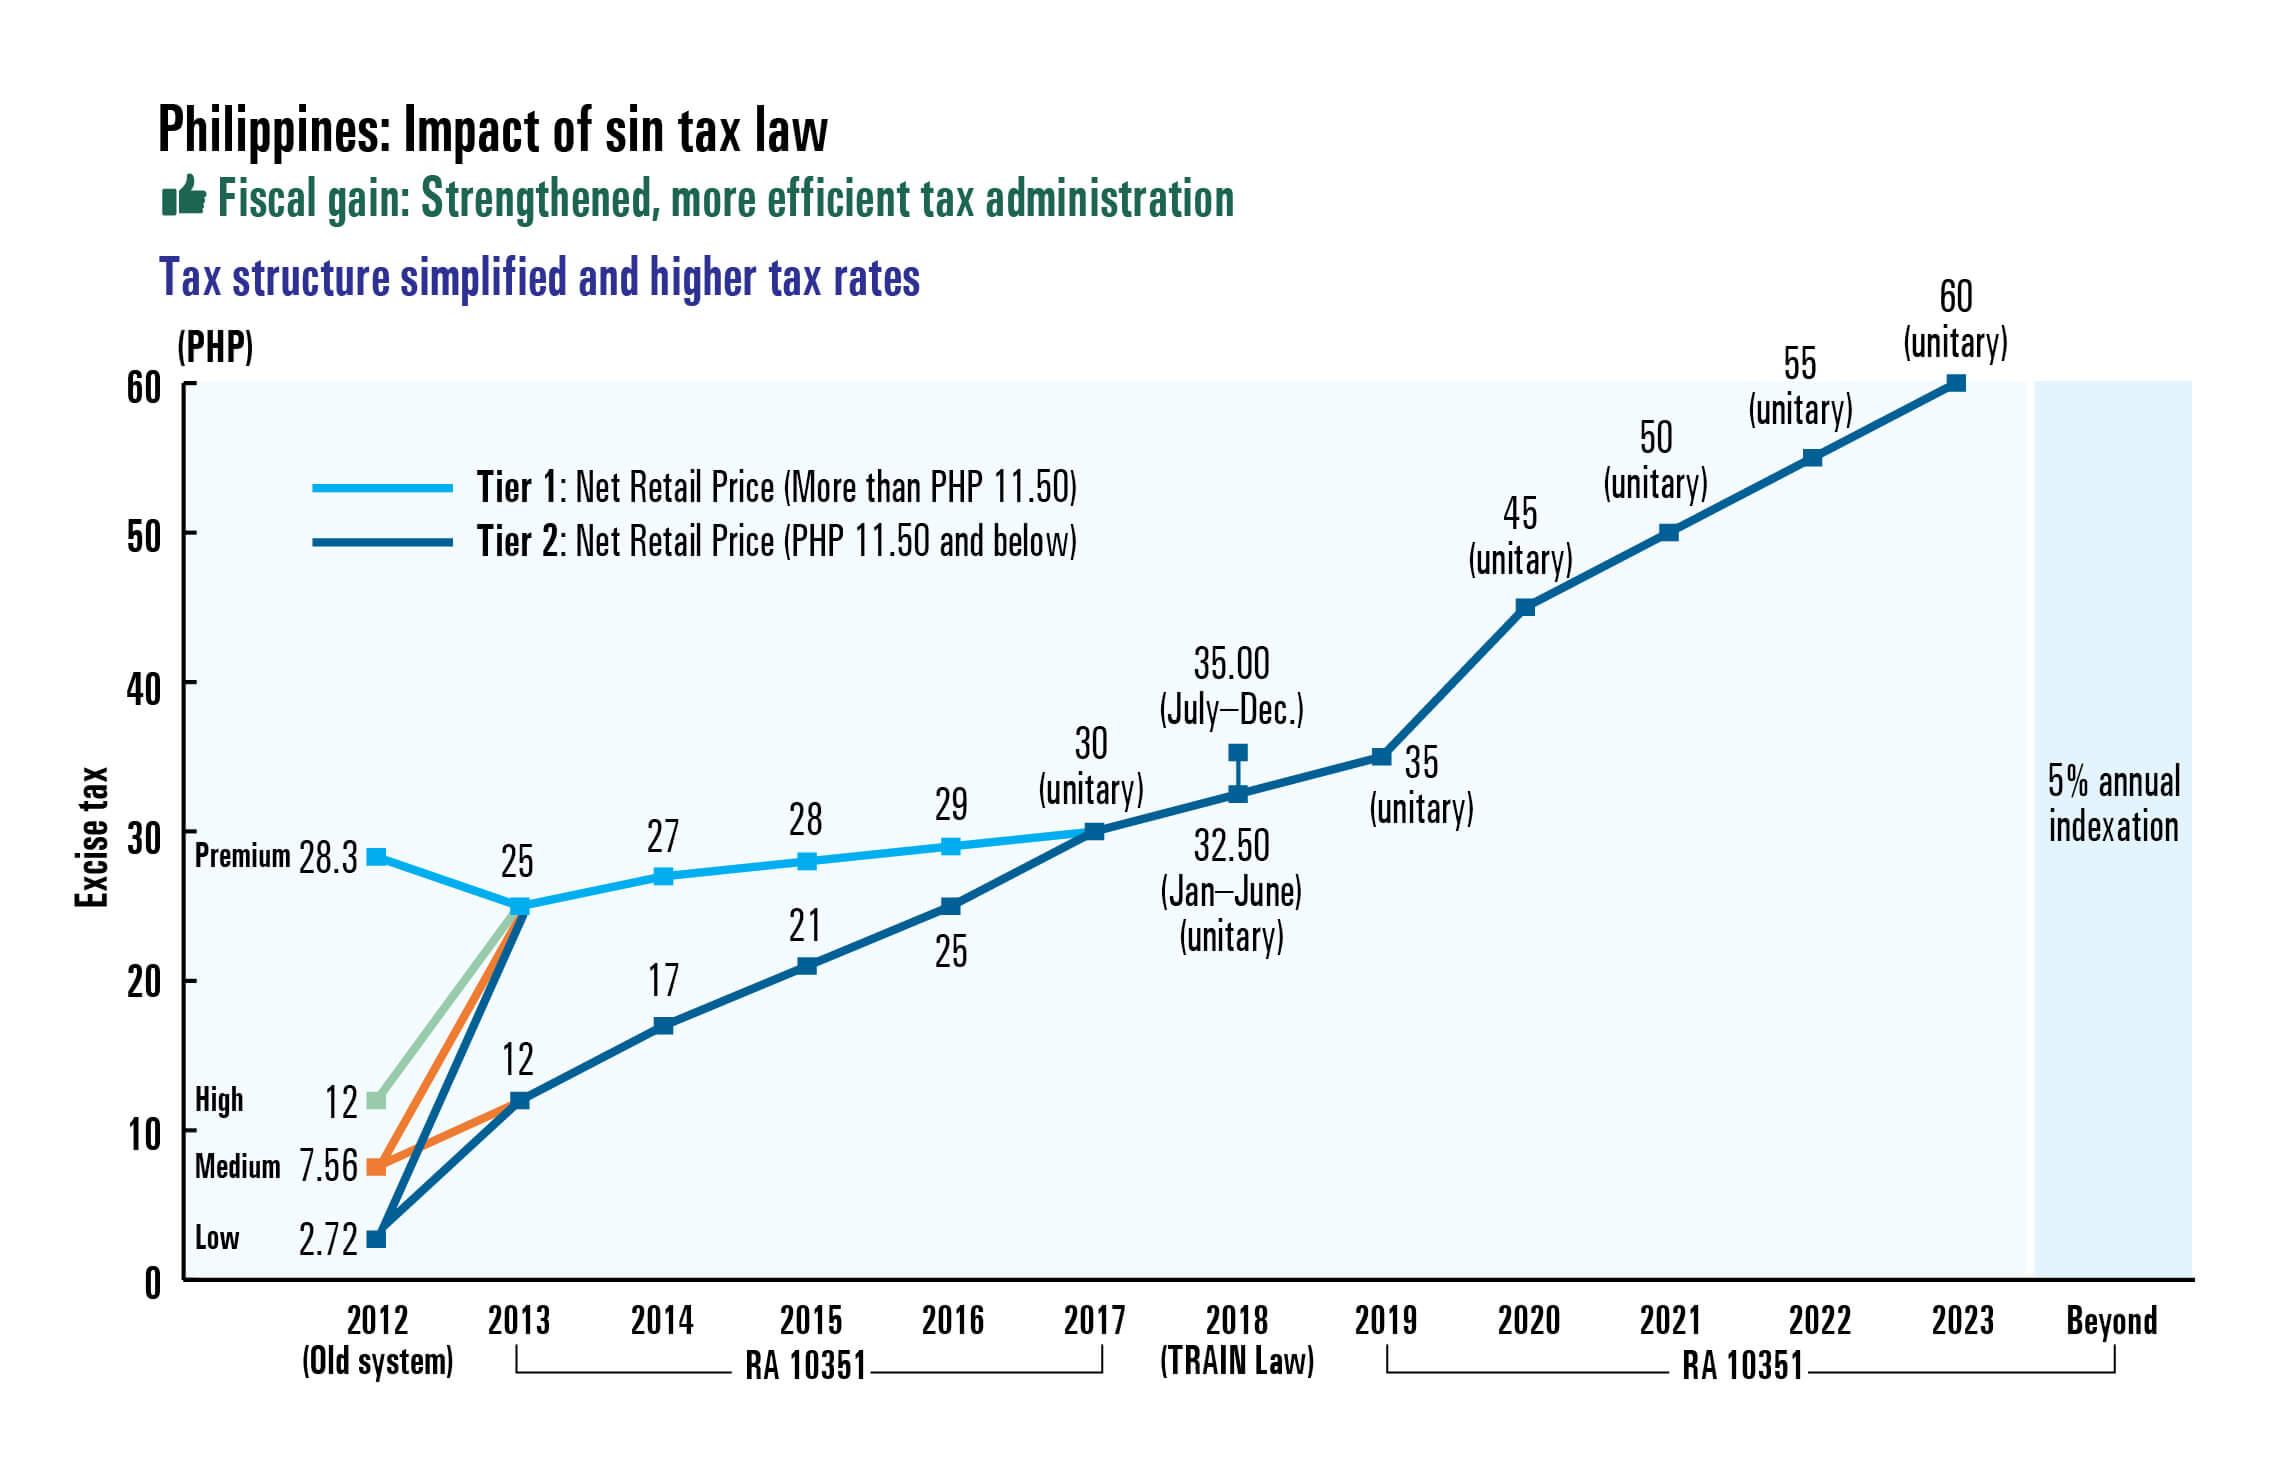 Tax structure simplified and higher tax rates